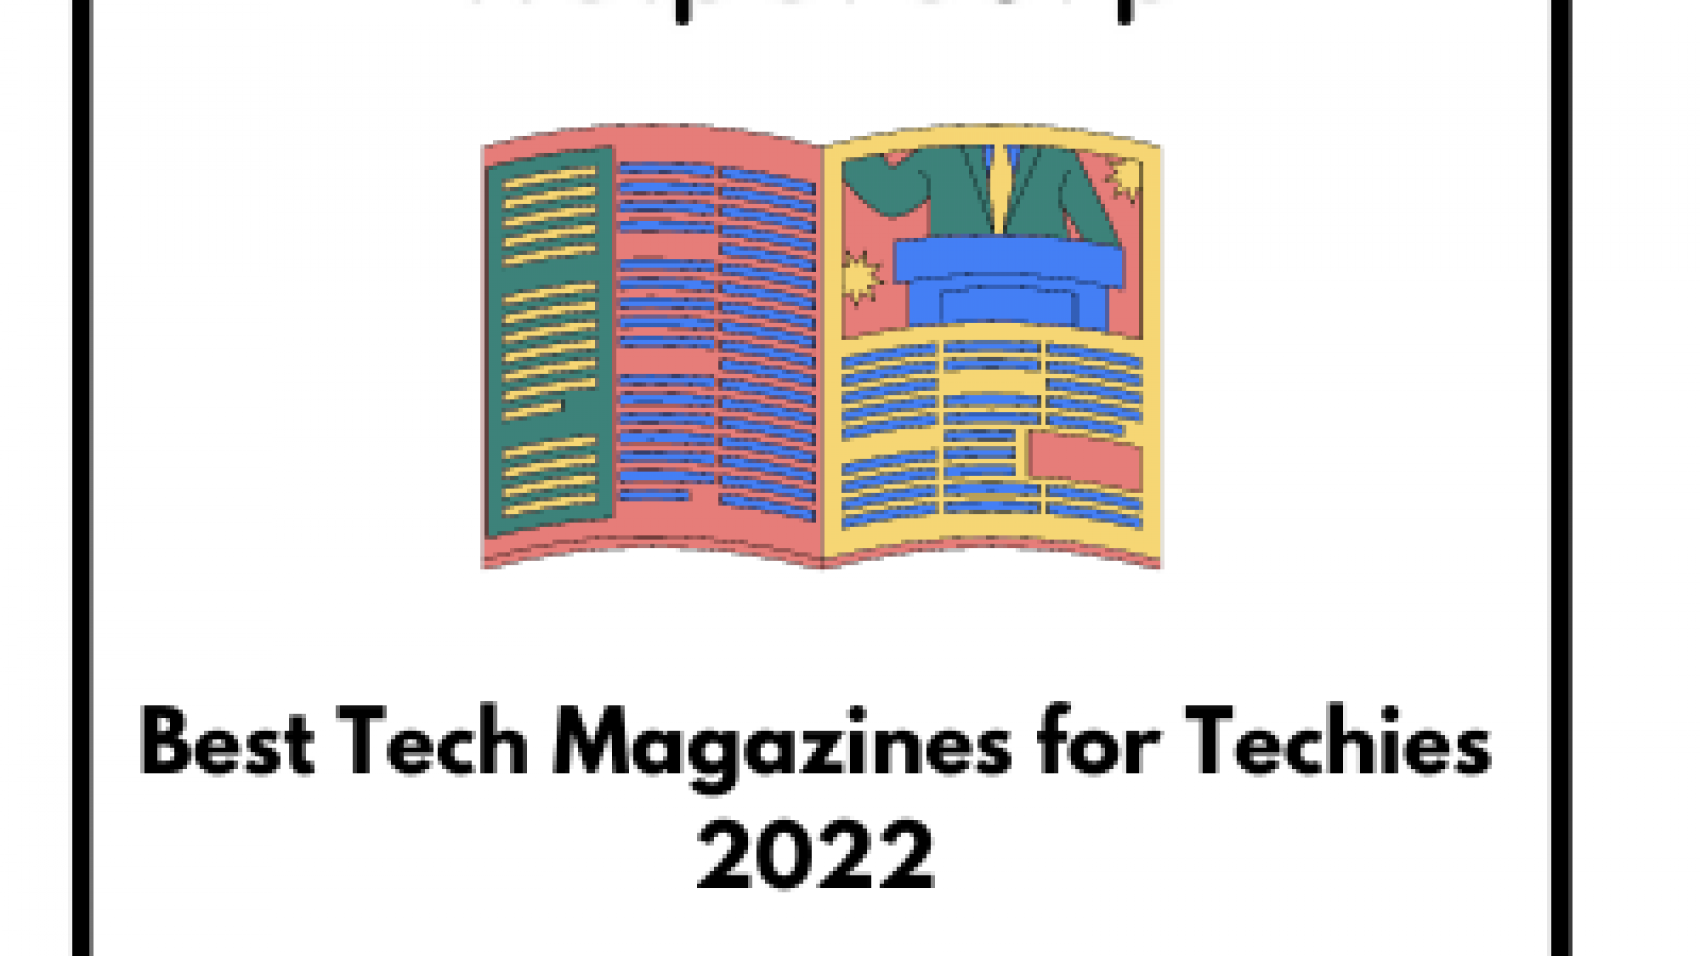 Best-Tech-Magazines-for-Techies-2022.